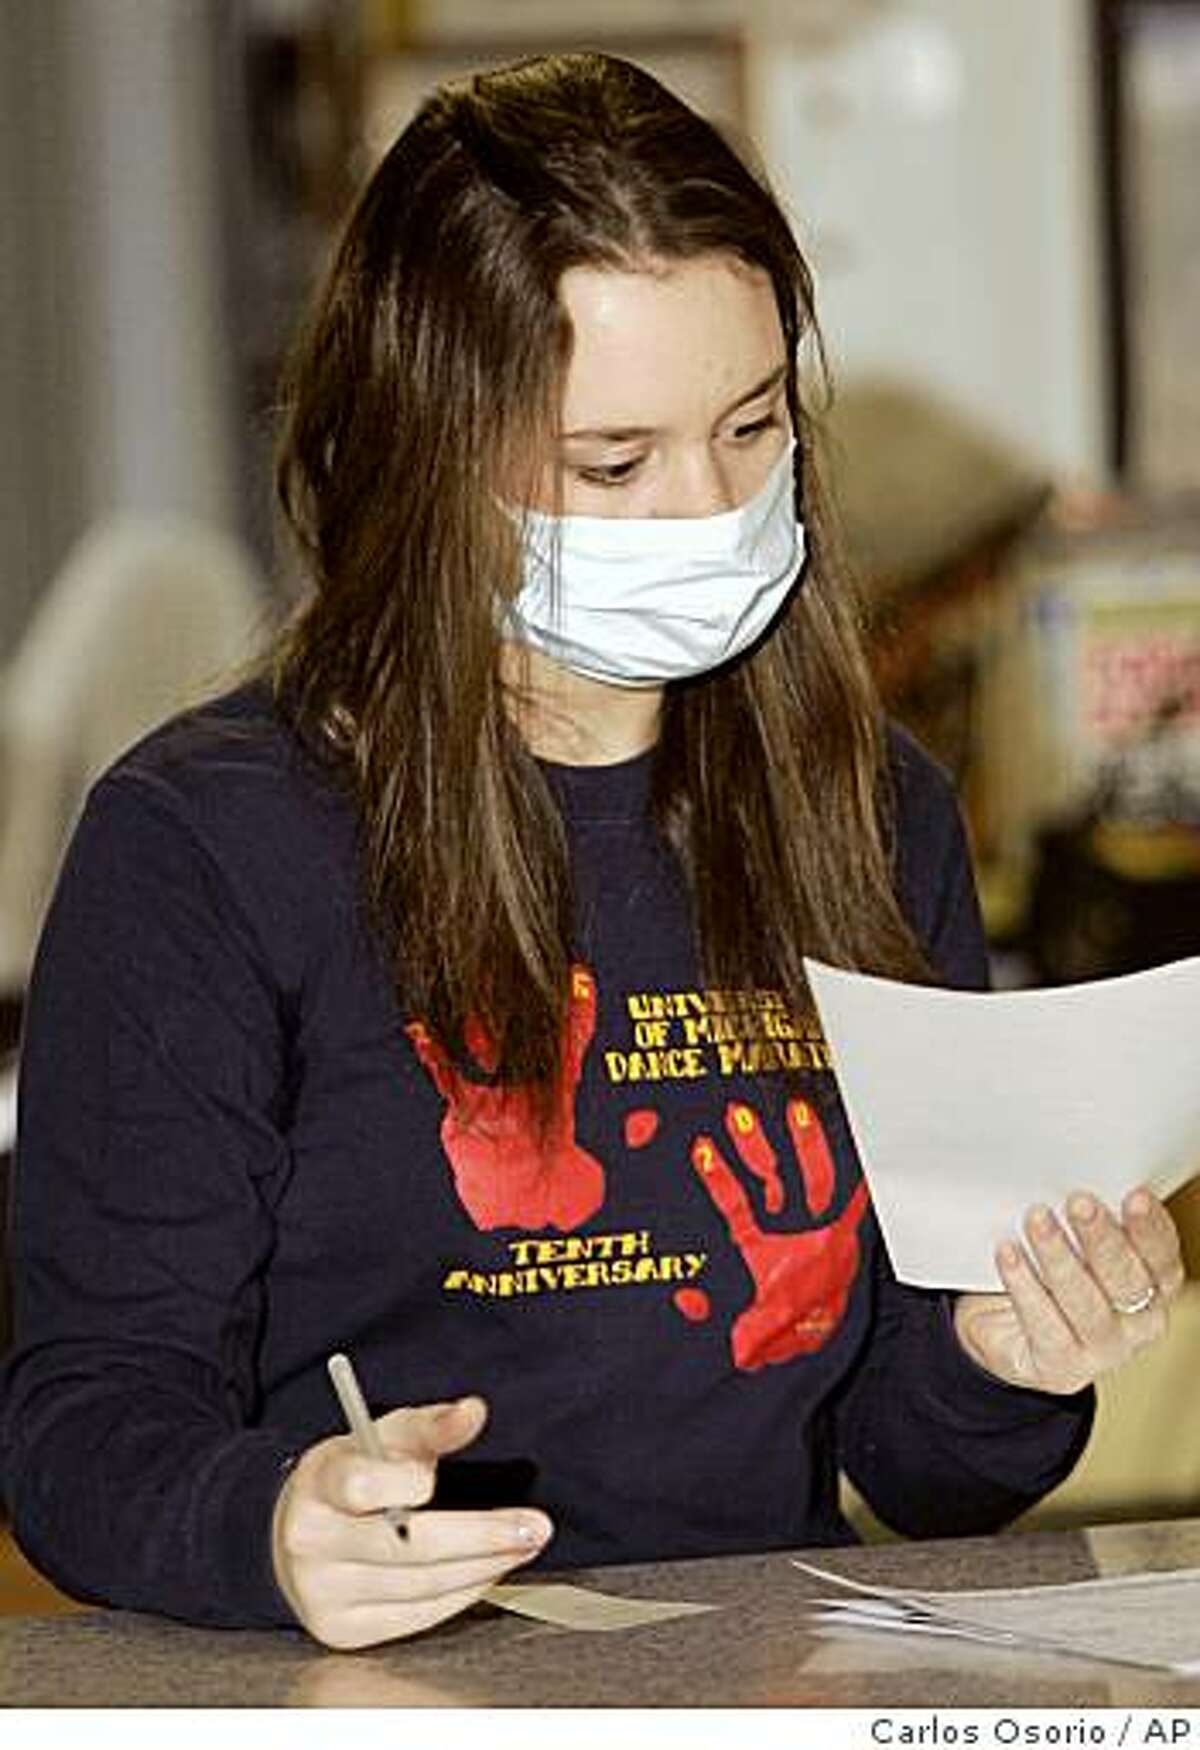 ** FILE **In this Jan 31, 2008, file photo, University of Michigan freshman Alicja Sobilo wears a surgical mask at work as part of a study as to whether the use of masks affects the spread of flu or other respiratory illnesses in Ann Arbor, Mich.. Doctors have long advised frequent hand-washing to avoid spreading germs. Wearing surgical masks and using hand sanitizers also can help, a novel University of Michigan study found. (AP Photo/Carlos Osorio, File)